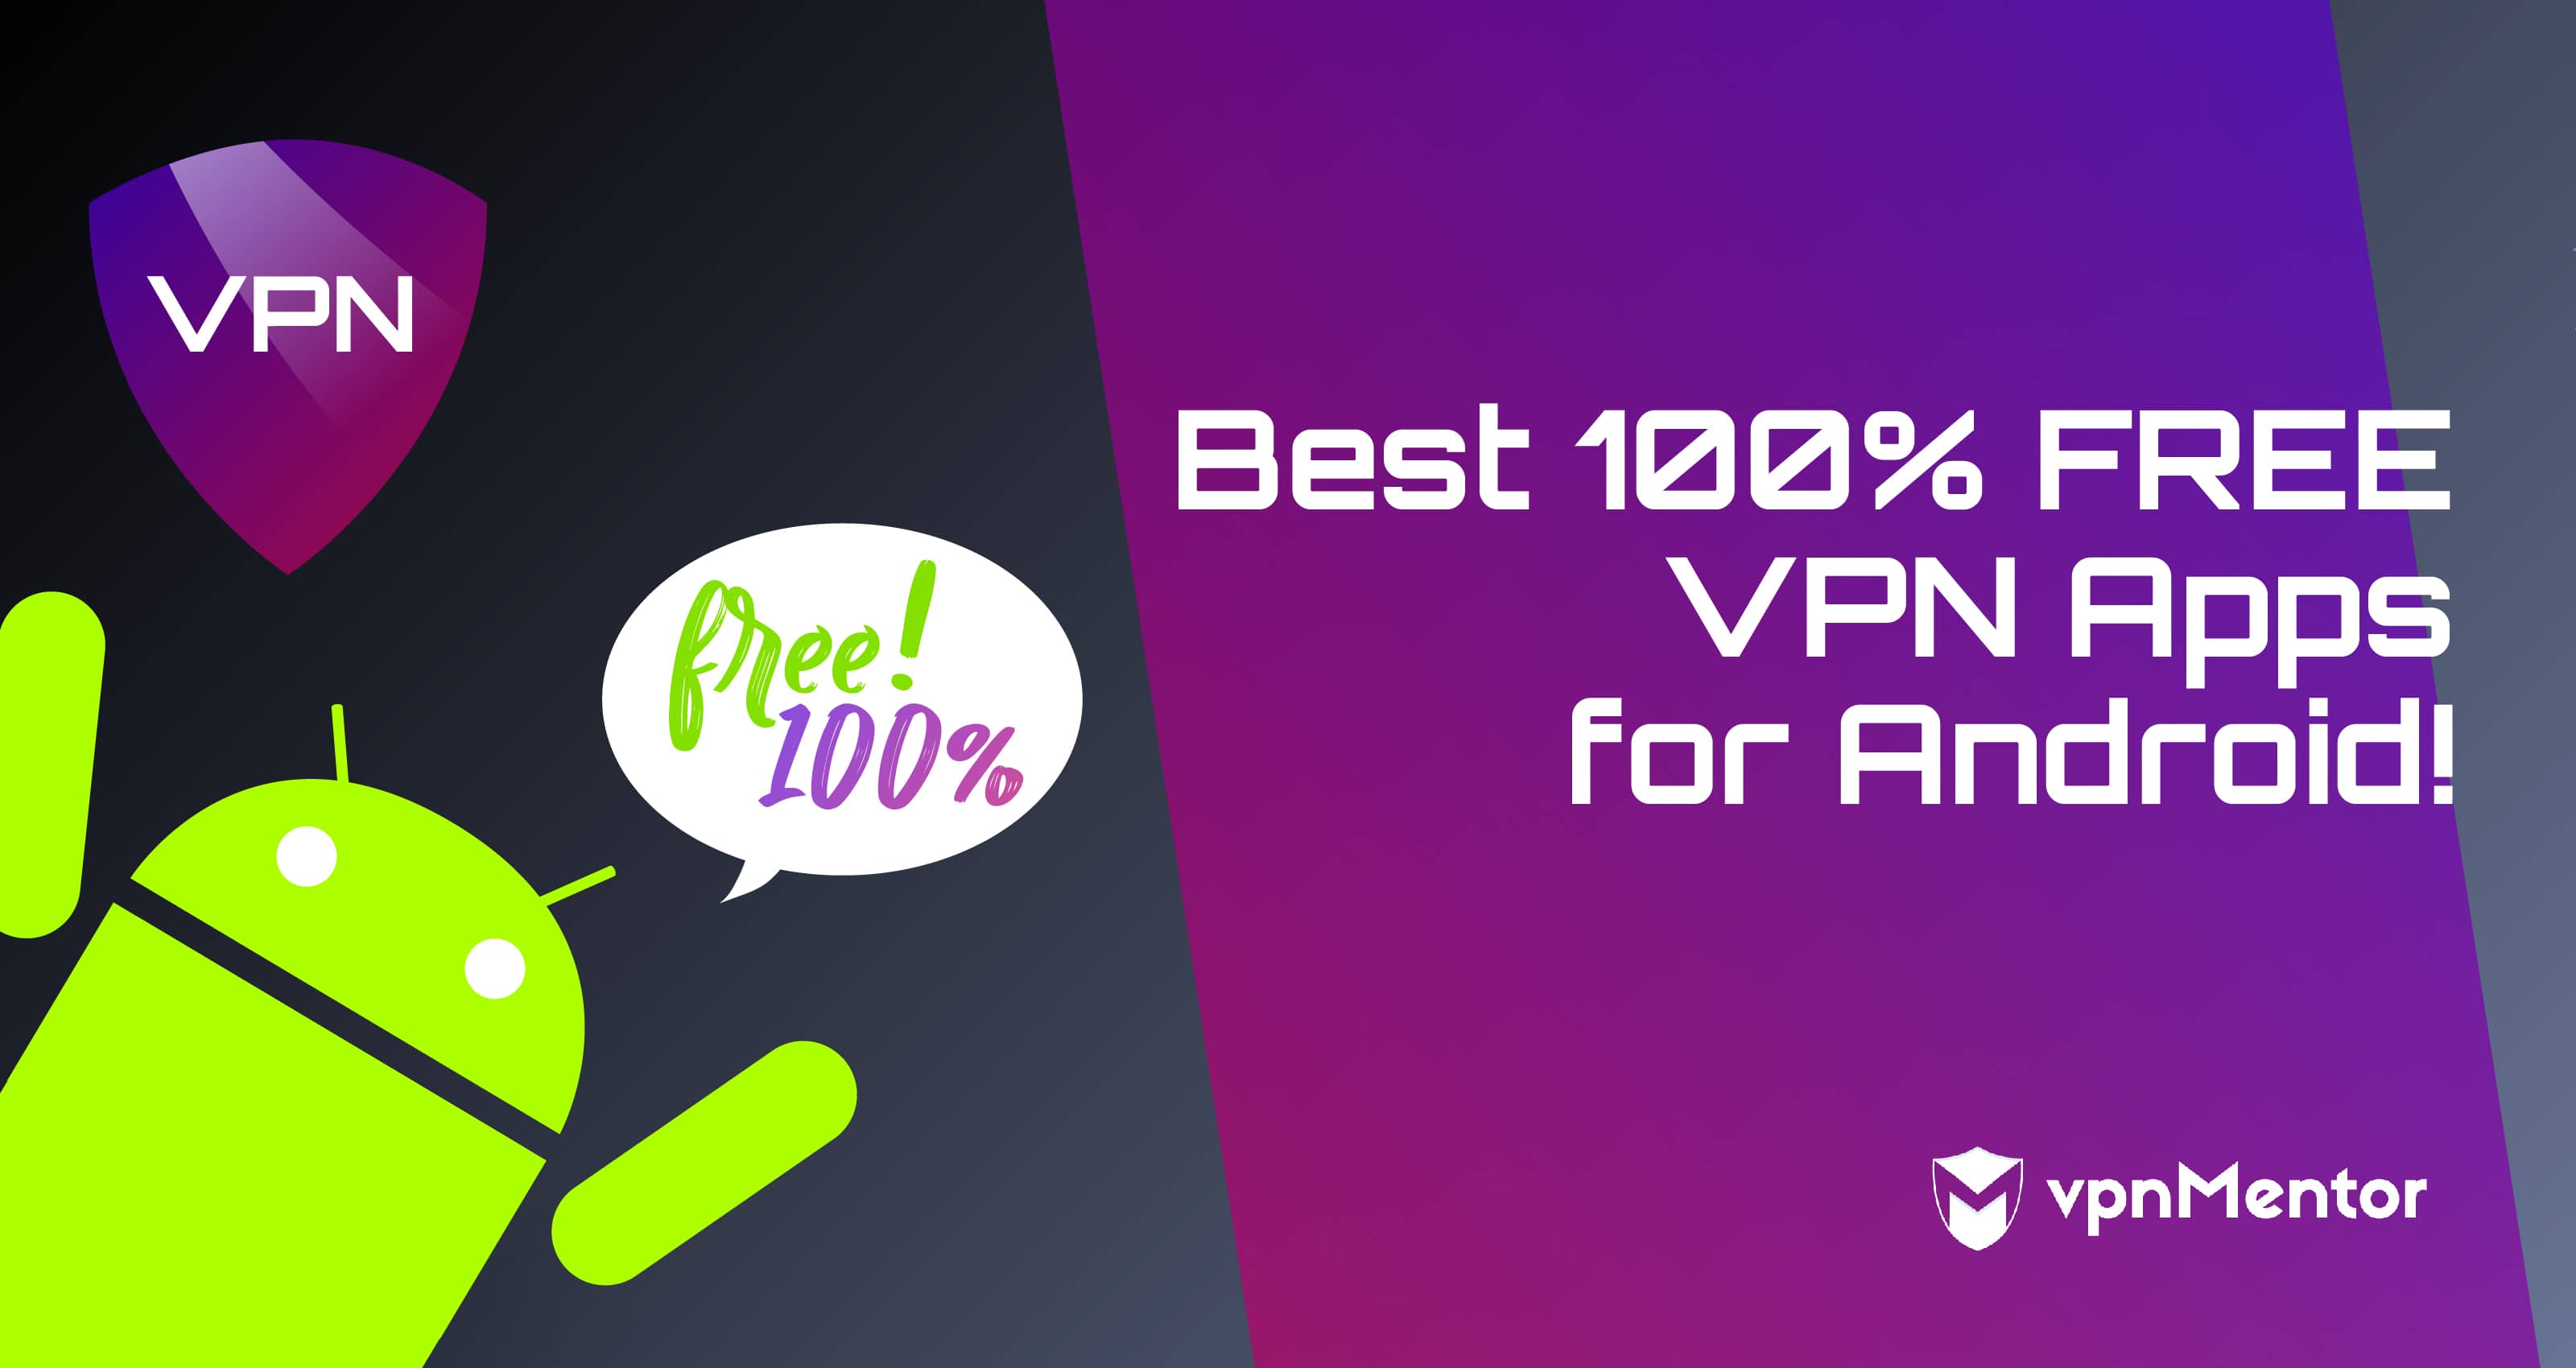 What's the fastest VPN for Android?